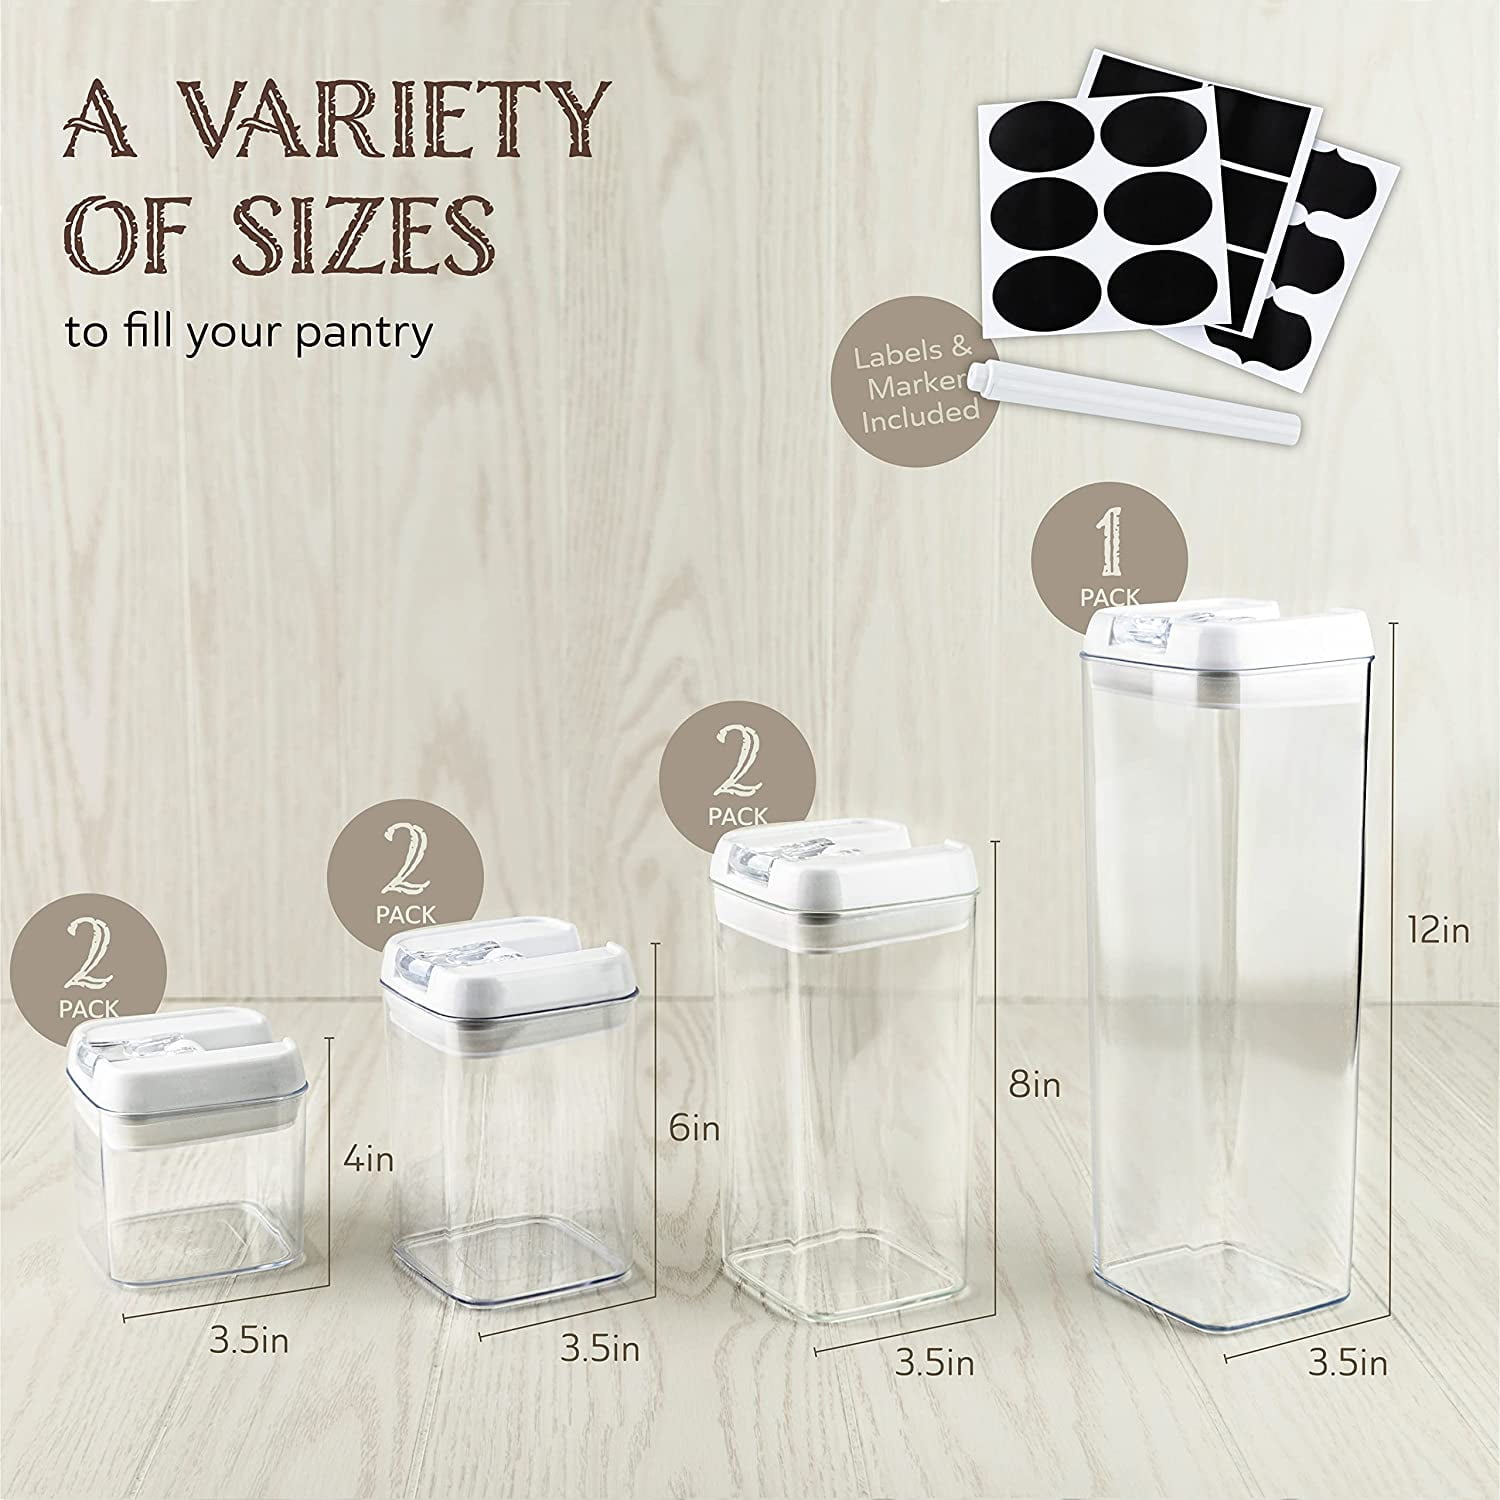 Hesroicy Moisture-proof Airtight Cereal Storage Container with Measuring  Cup and Sealed Lid - Perfect Kitchen Countertop Organizer for Daily Use